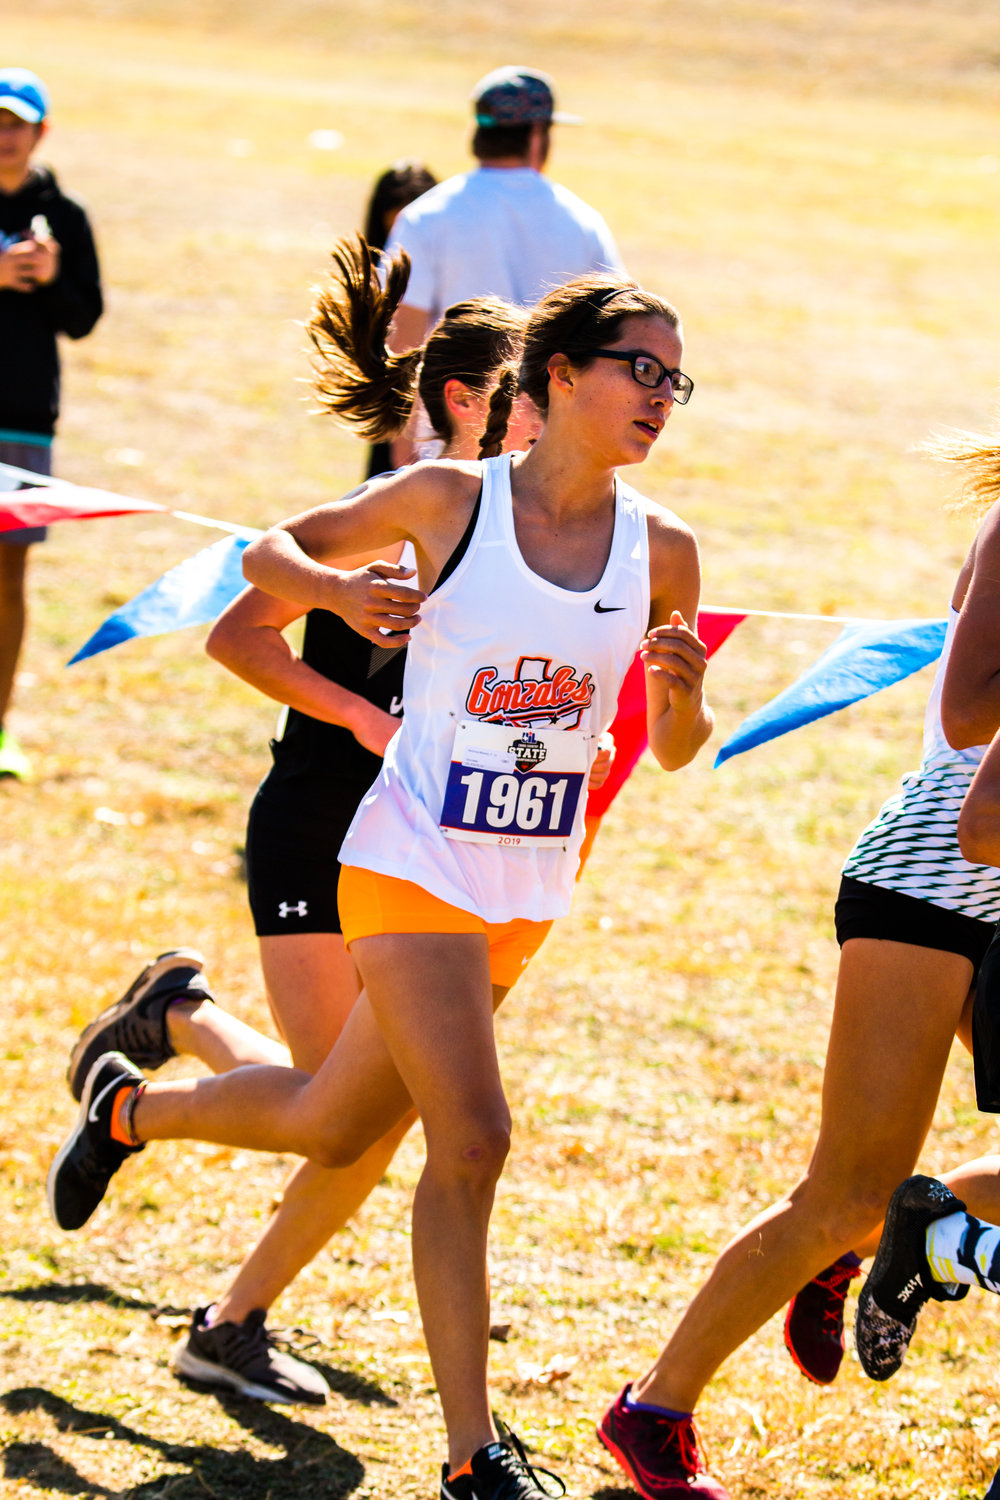 Veronica Moreno competed in the Class 4A girls race last Saturday, finishing 19th overall with a personal best of 12:06.11.